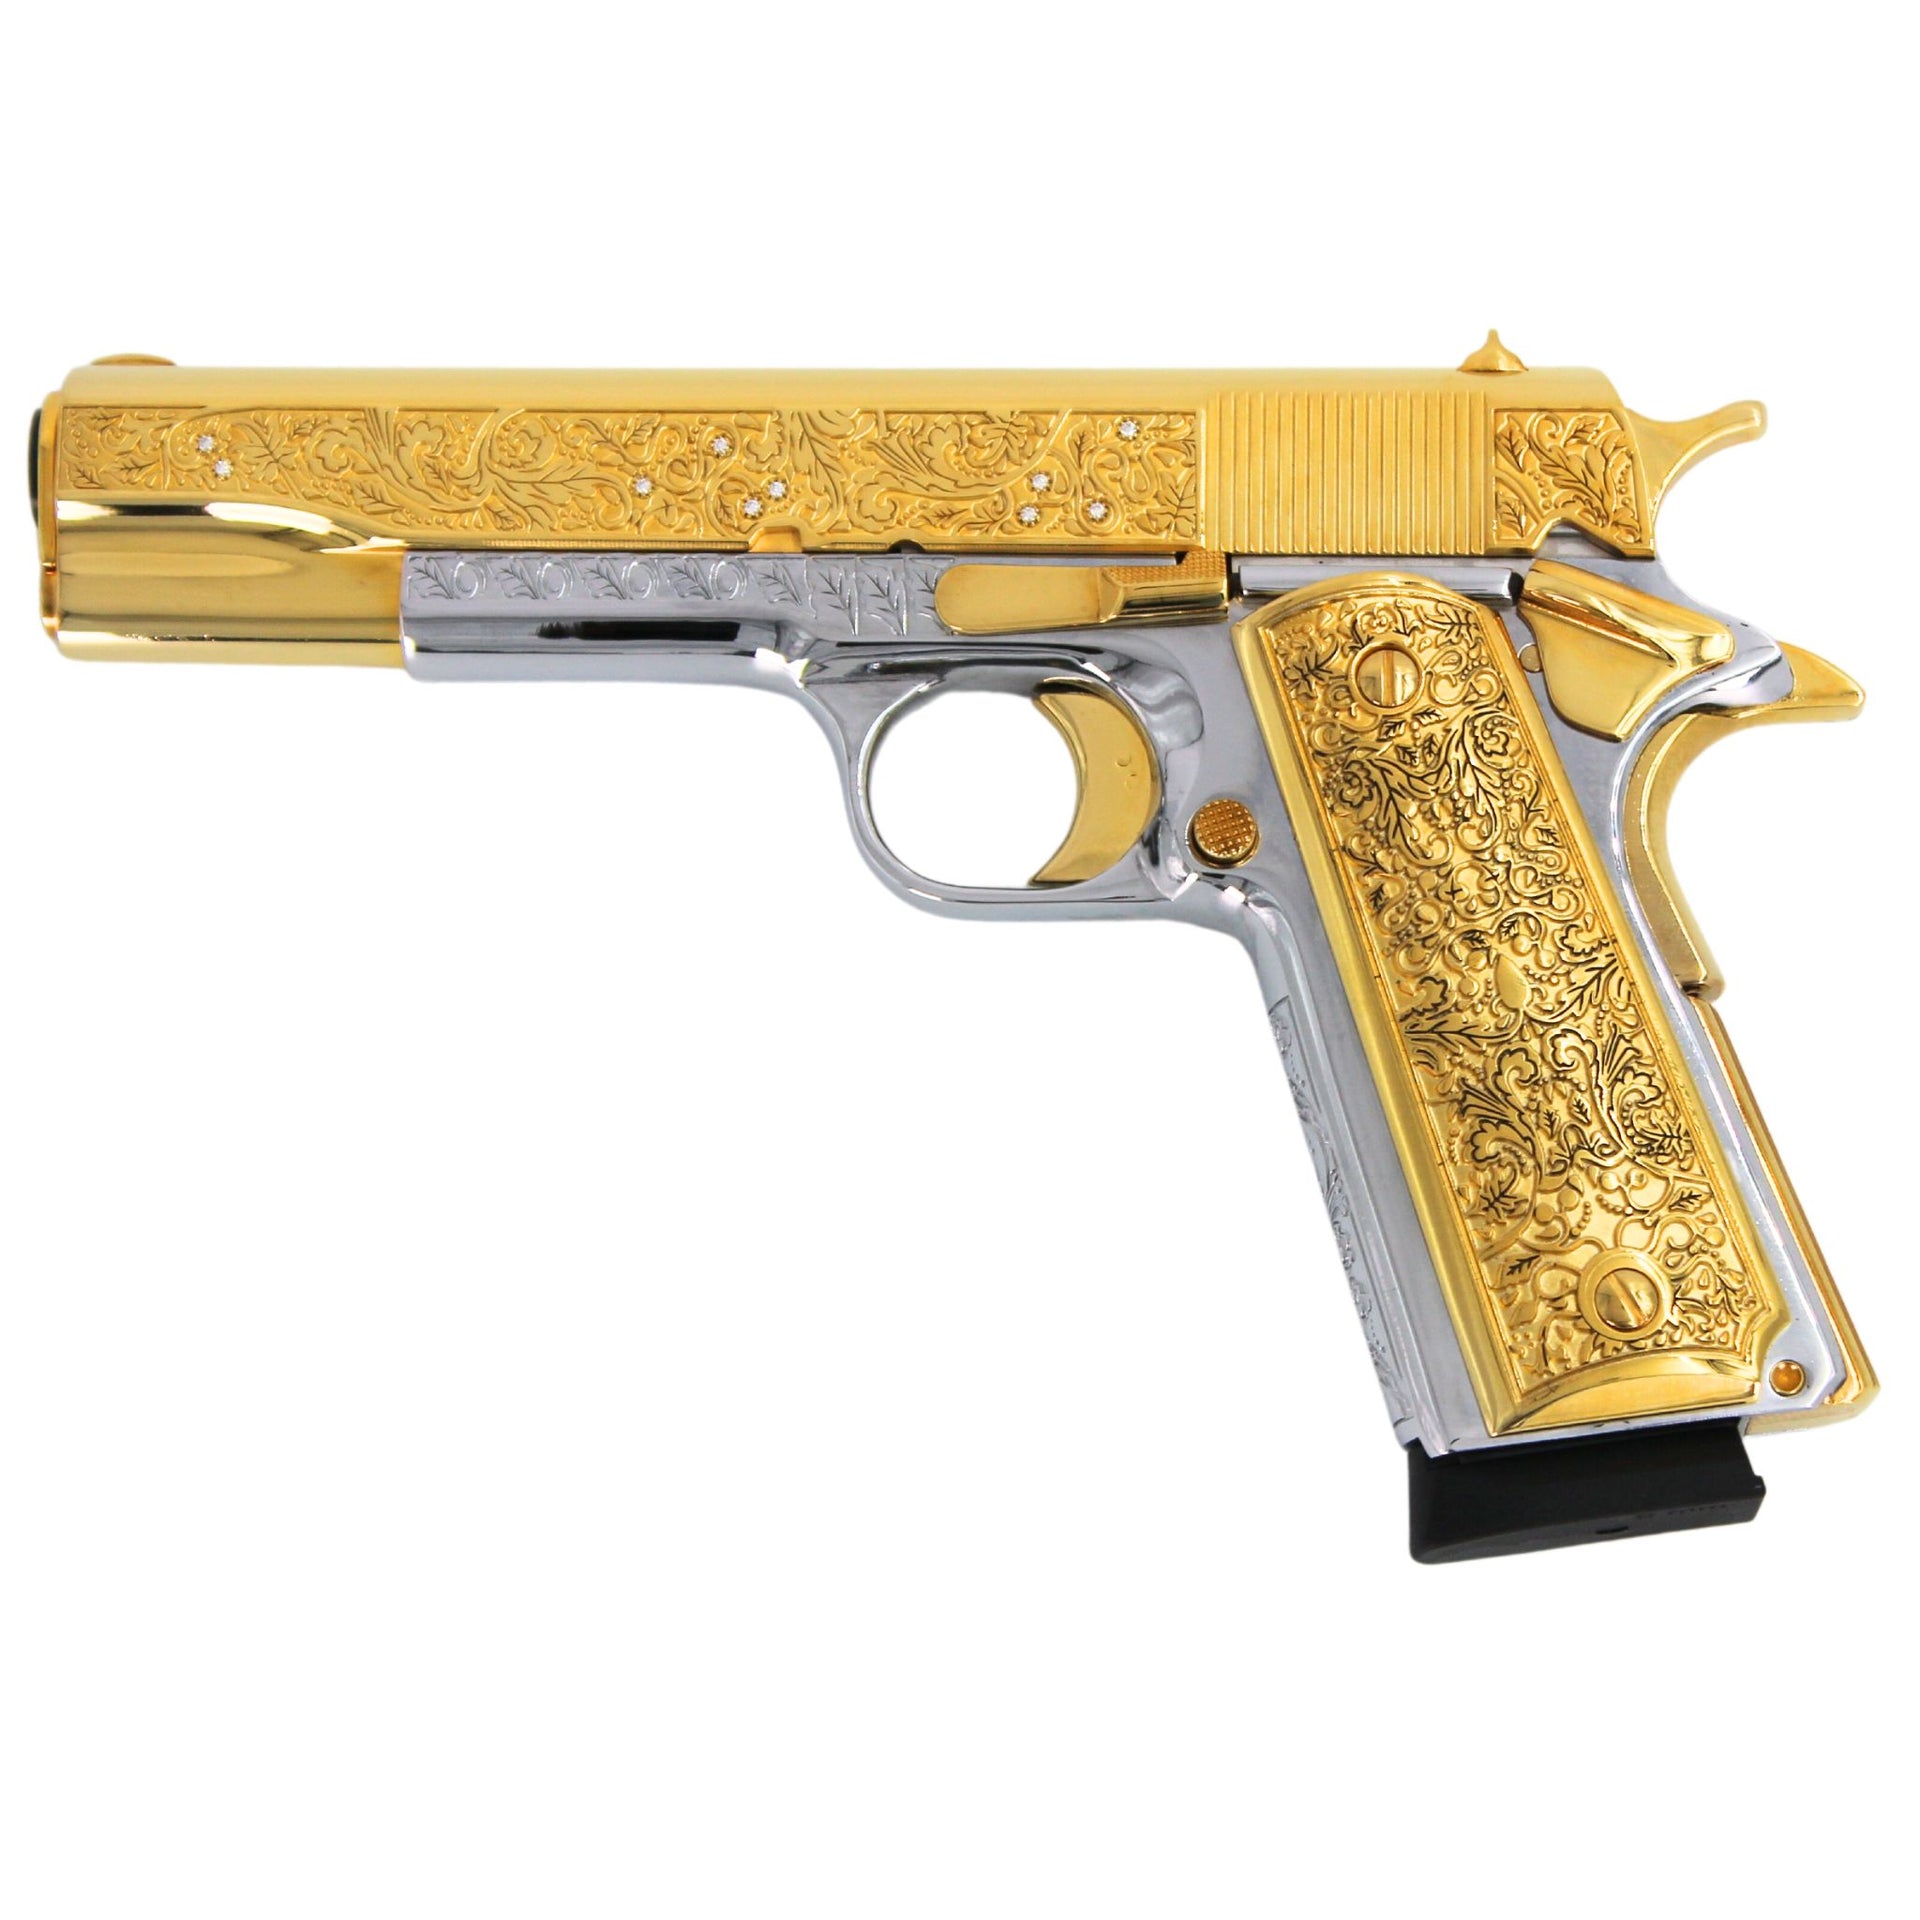 Rock Island 1911 Standard FS, 45 ACP, Vine and Berries with Diamonds, 24 karat Gold plated and High Polished White Chrome, SKU: 7010461778022,  Gold Gun,  Gold Firearm, Engraved Firearm  